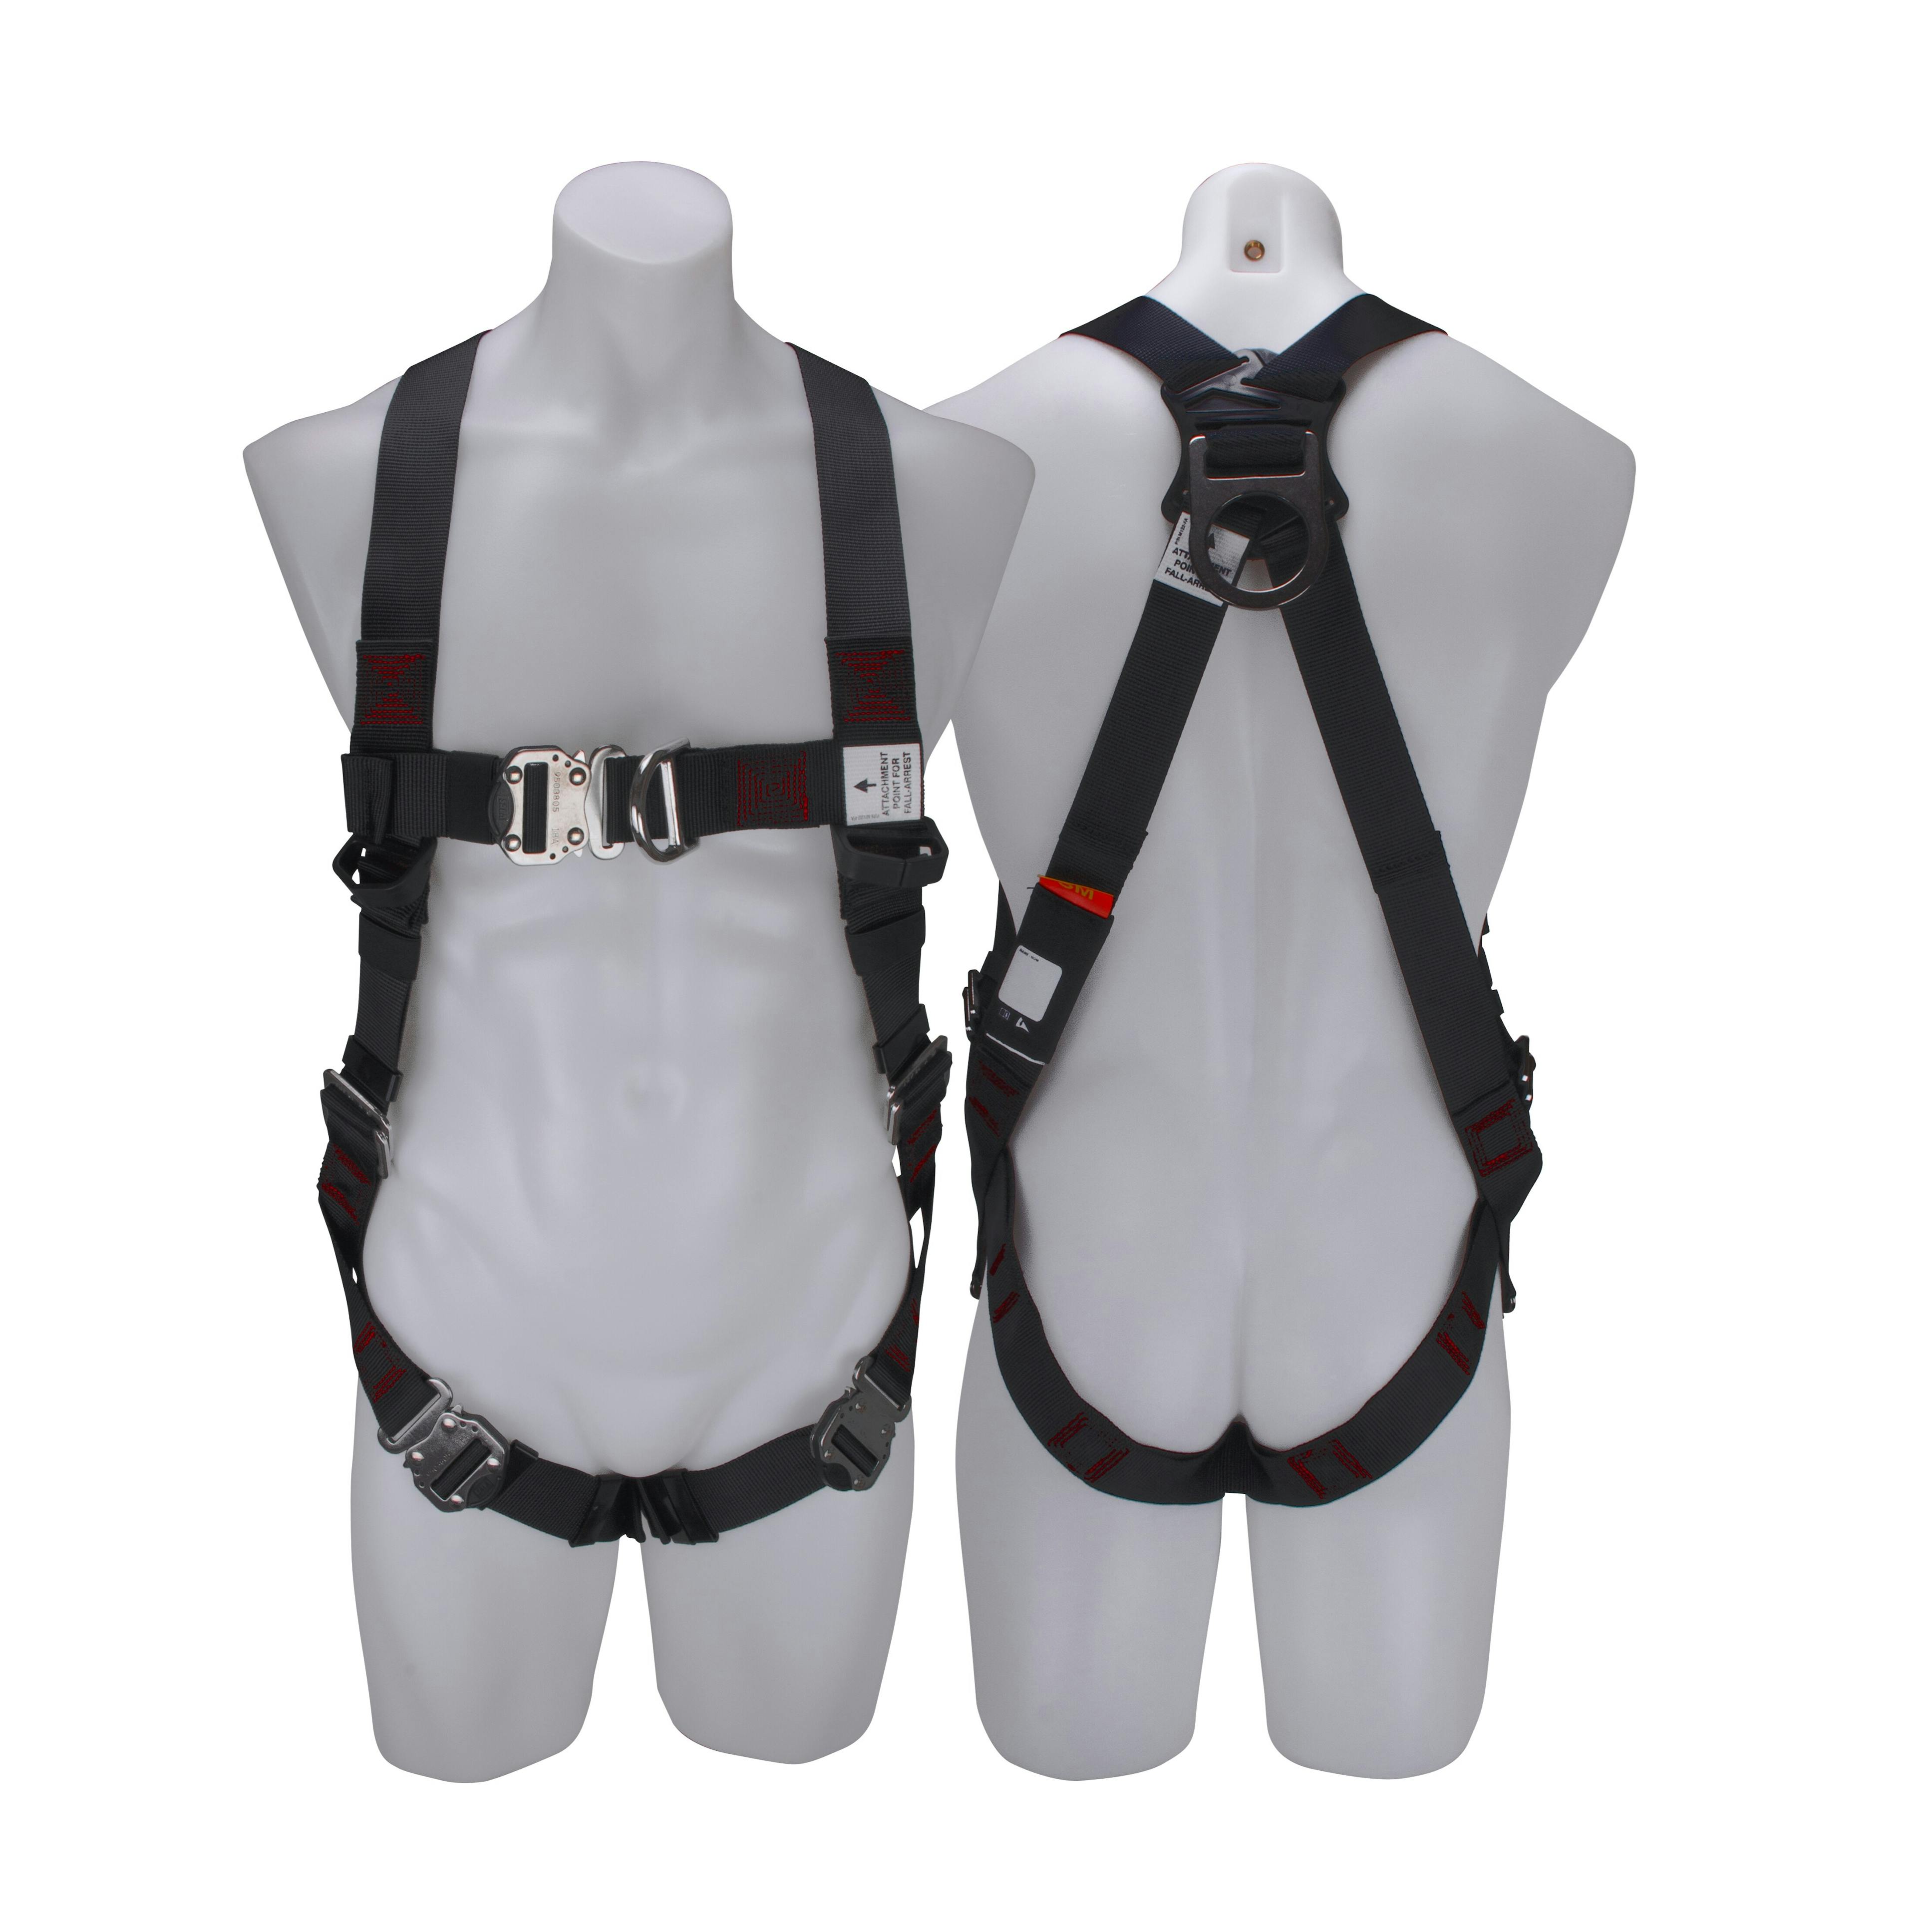 3M™ PROTECTA® X Riggers Harness with Stainless Steel 1161667, Red and Black, Extra Large, 1 EA/Case